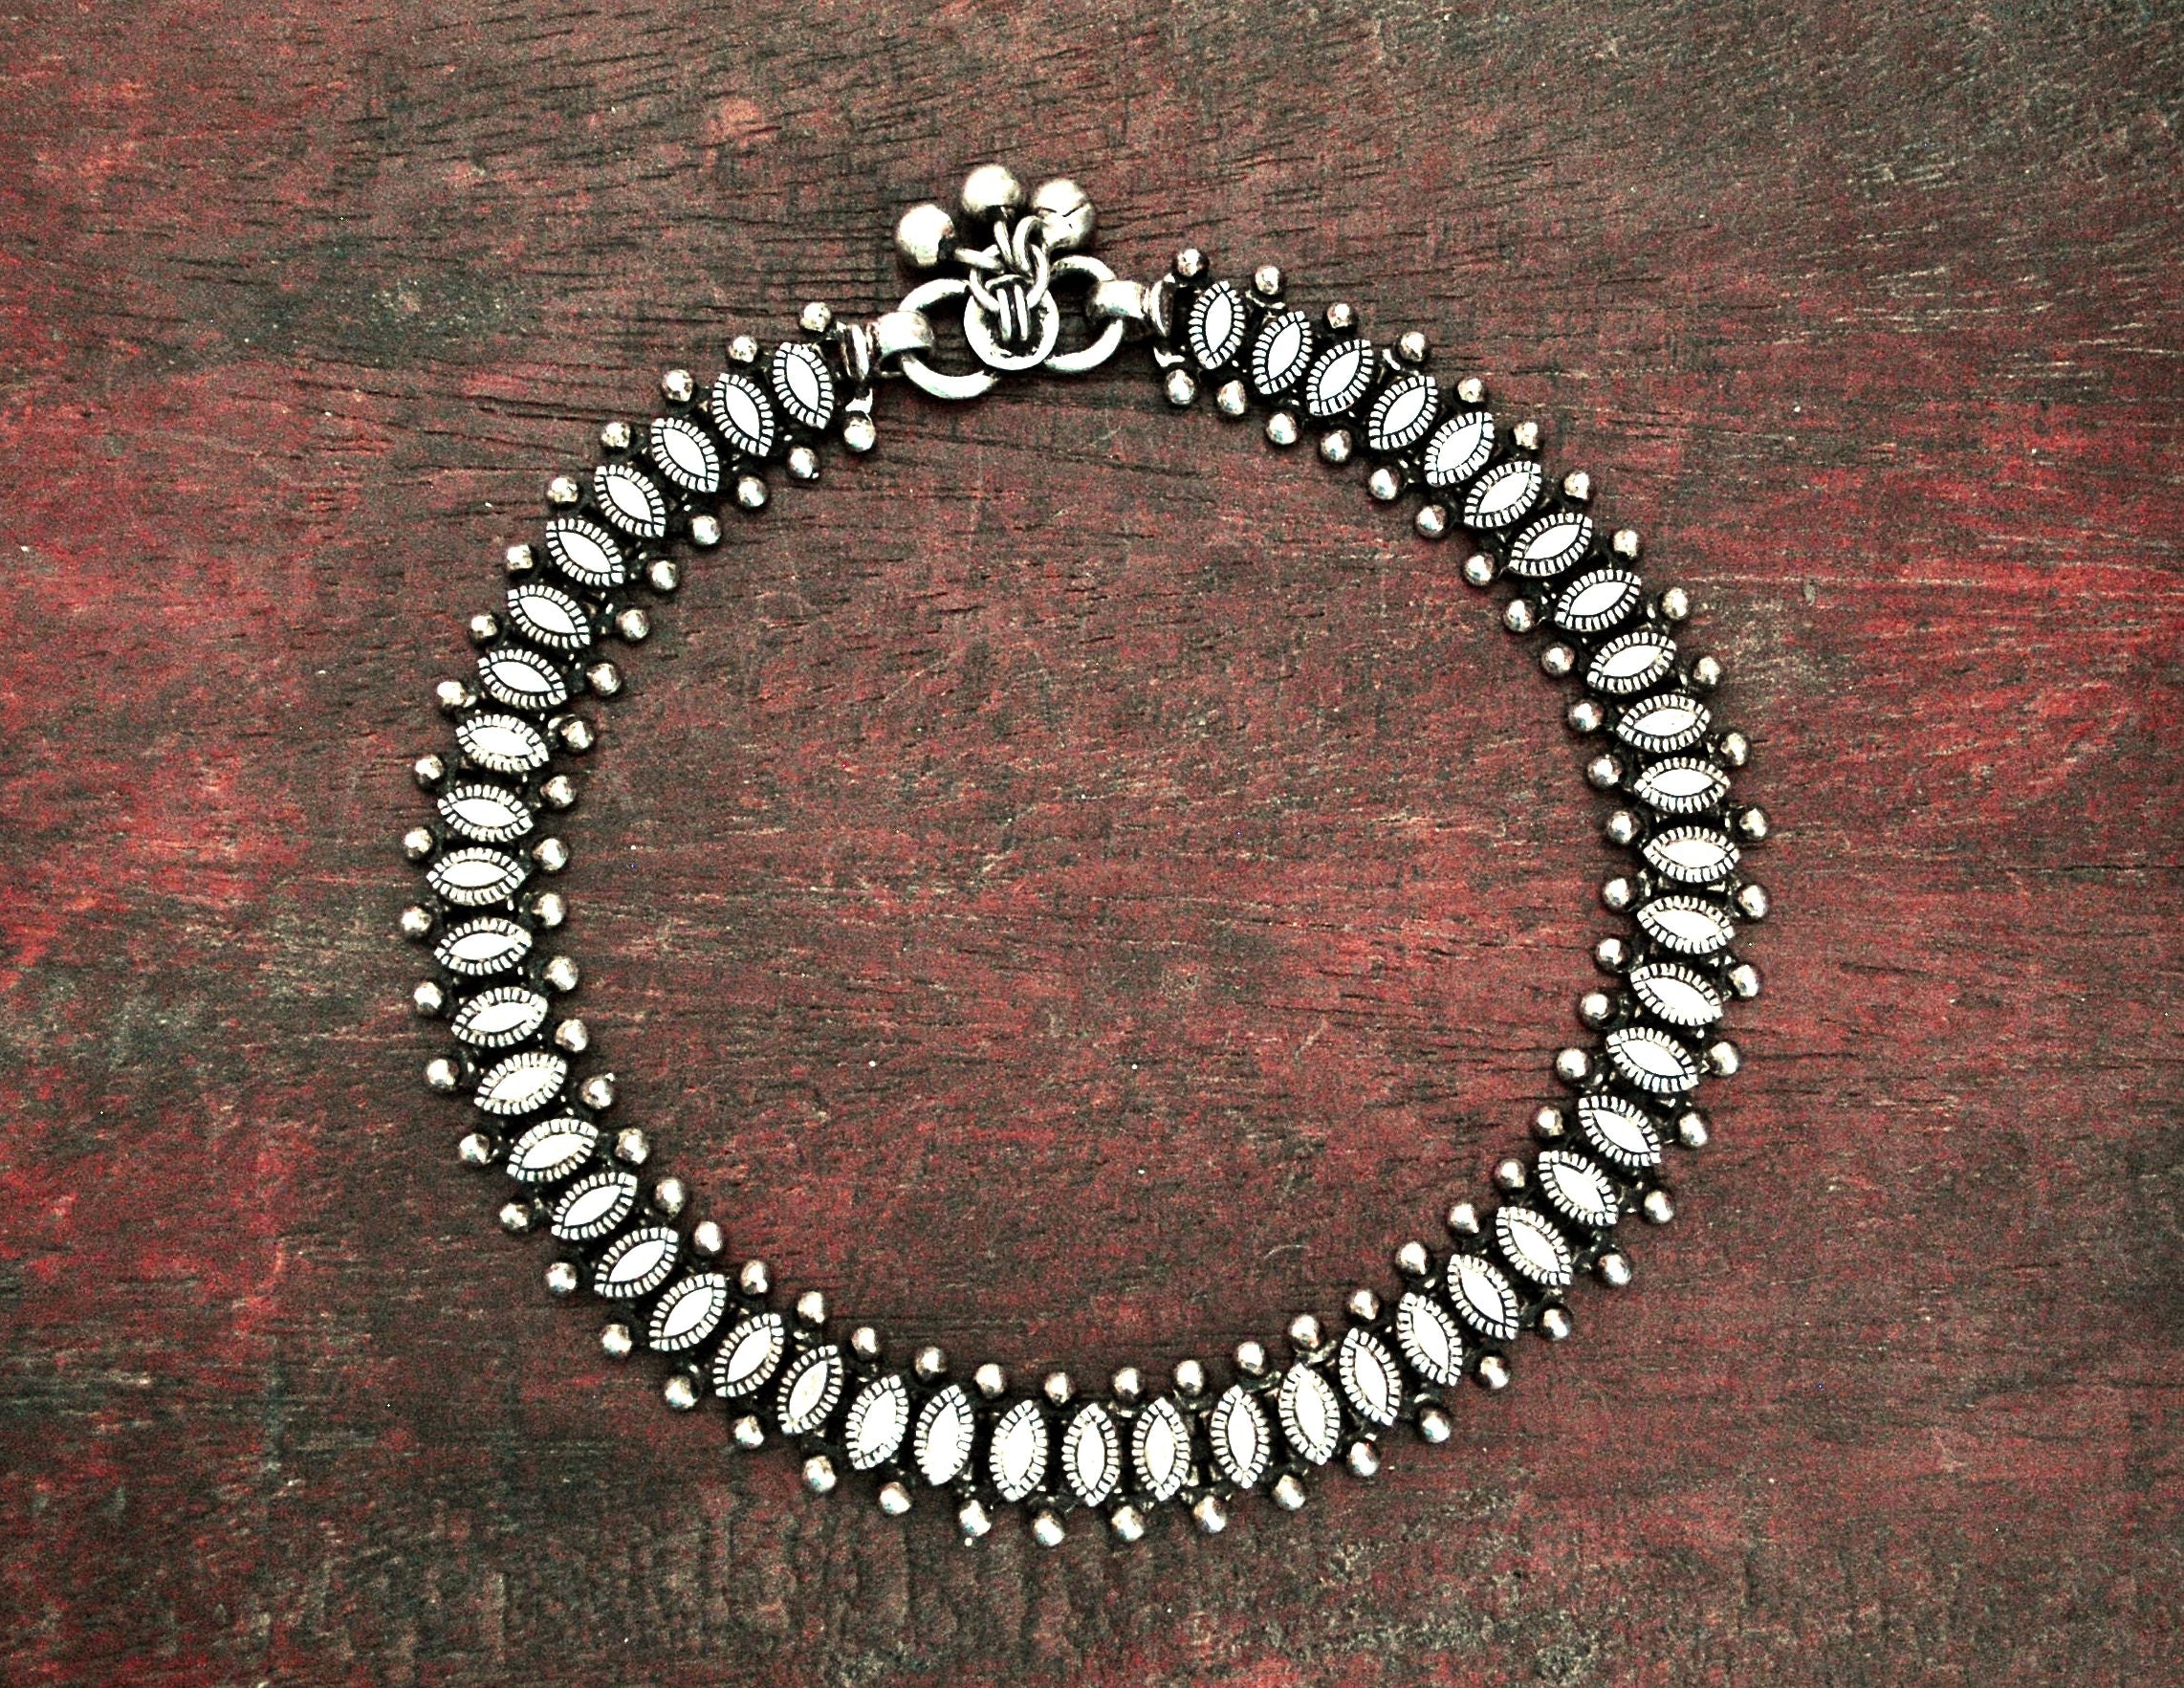 Rajasthani Anklet with Bells